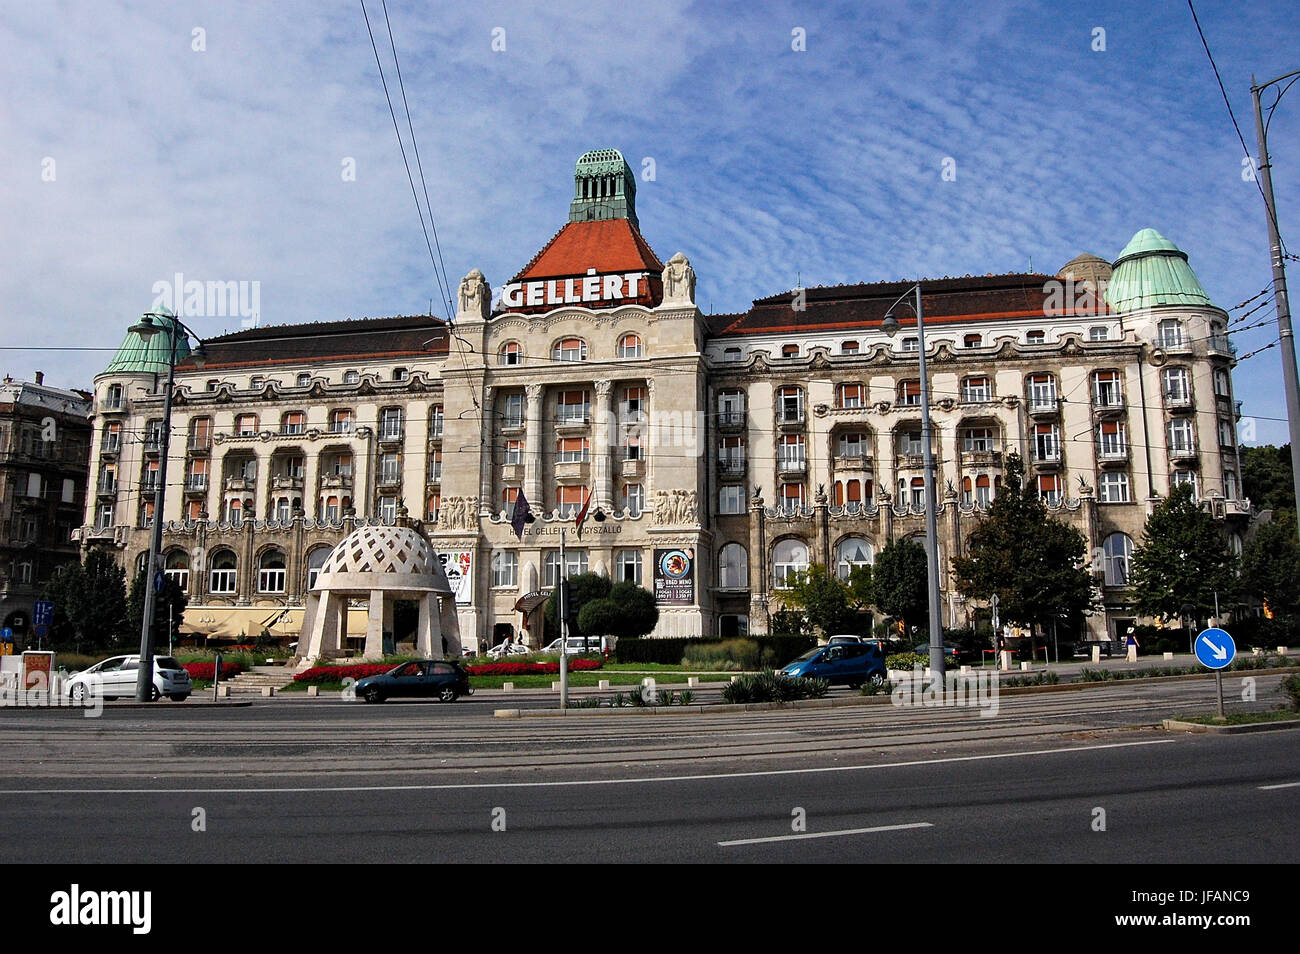 Front facade of the Gellert Hotel & Spa in Budapest. Image taken in Budapest, Hungary, 2015. Stock Photo